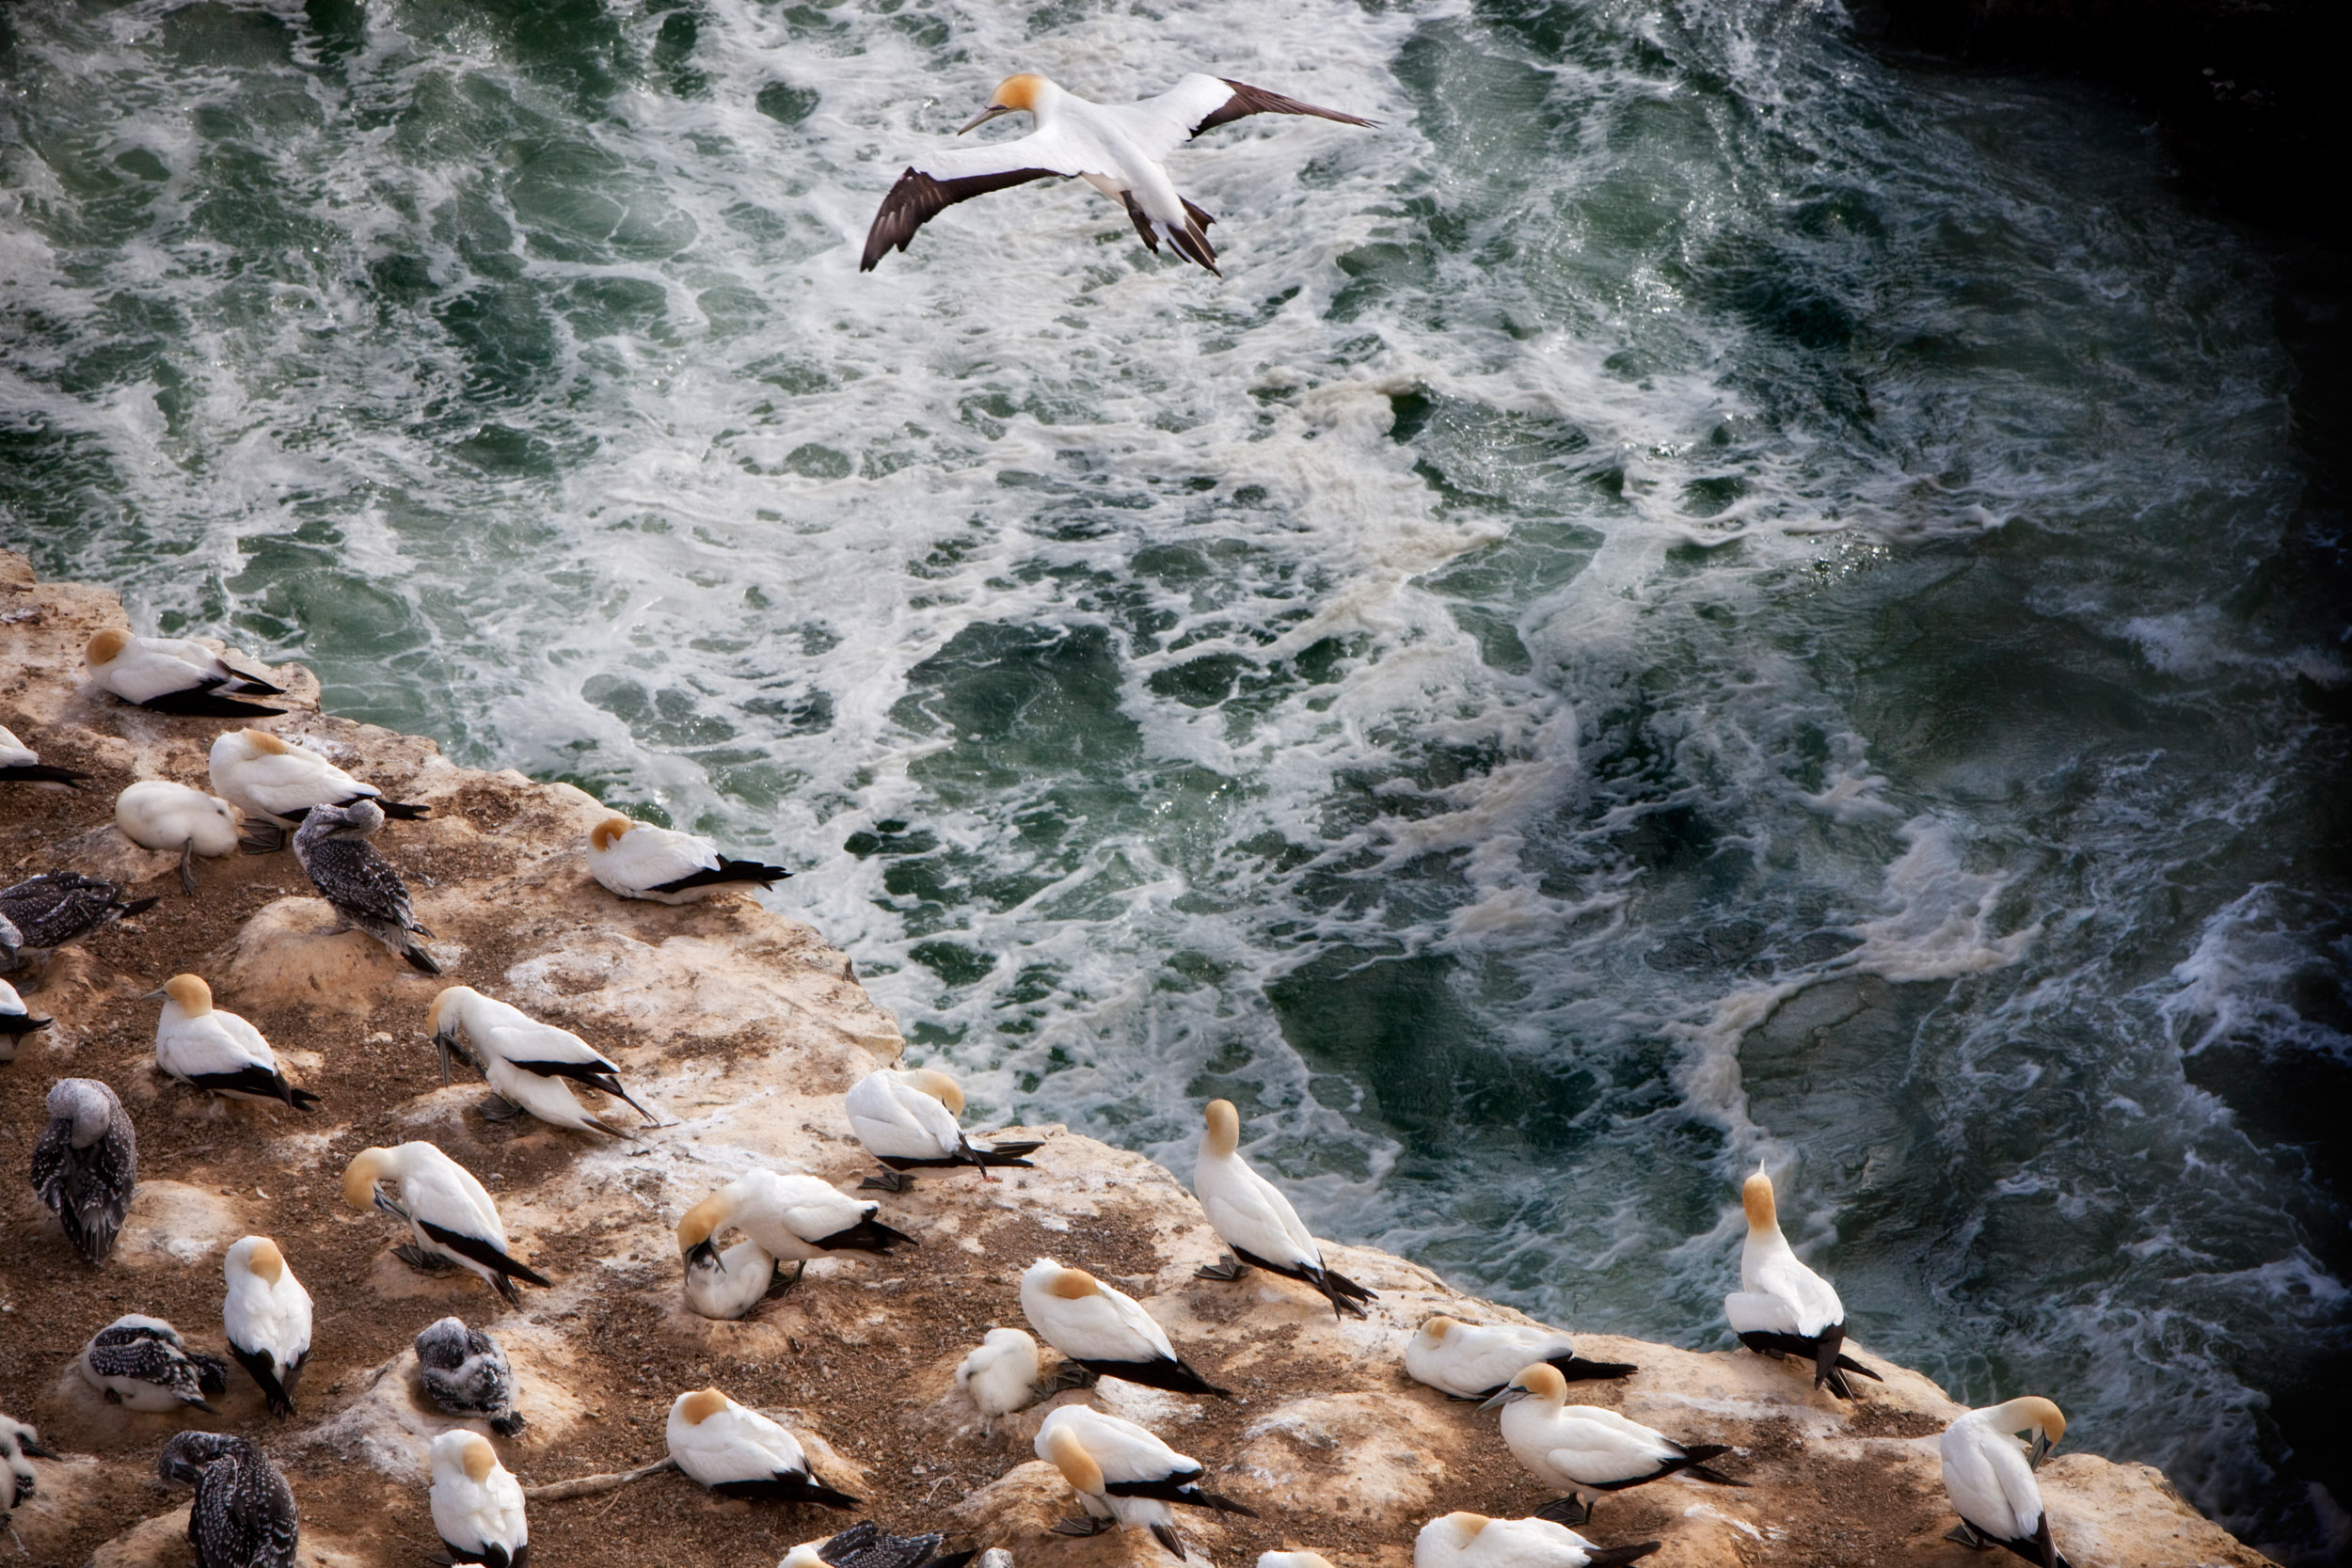 Sea birds jostle for position to sleep on a tall rock while waves crash below